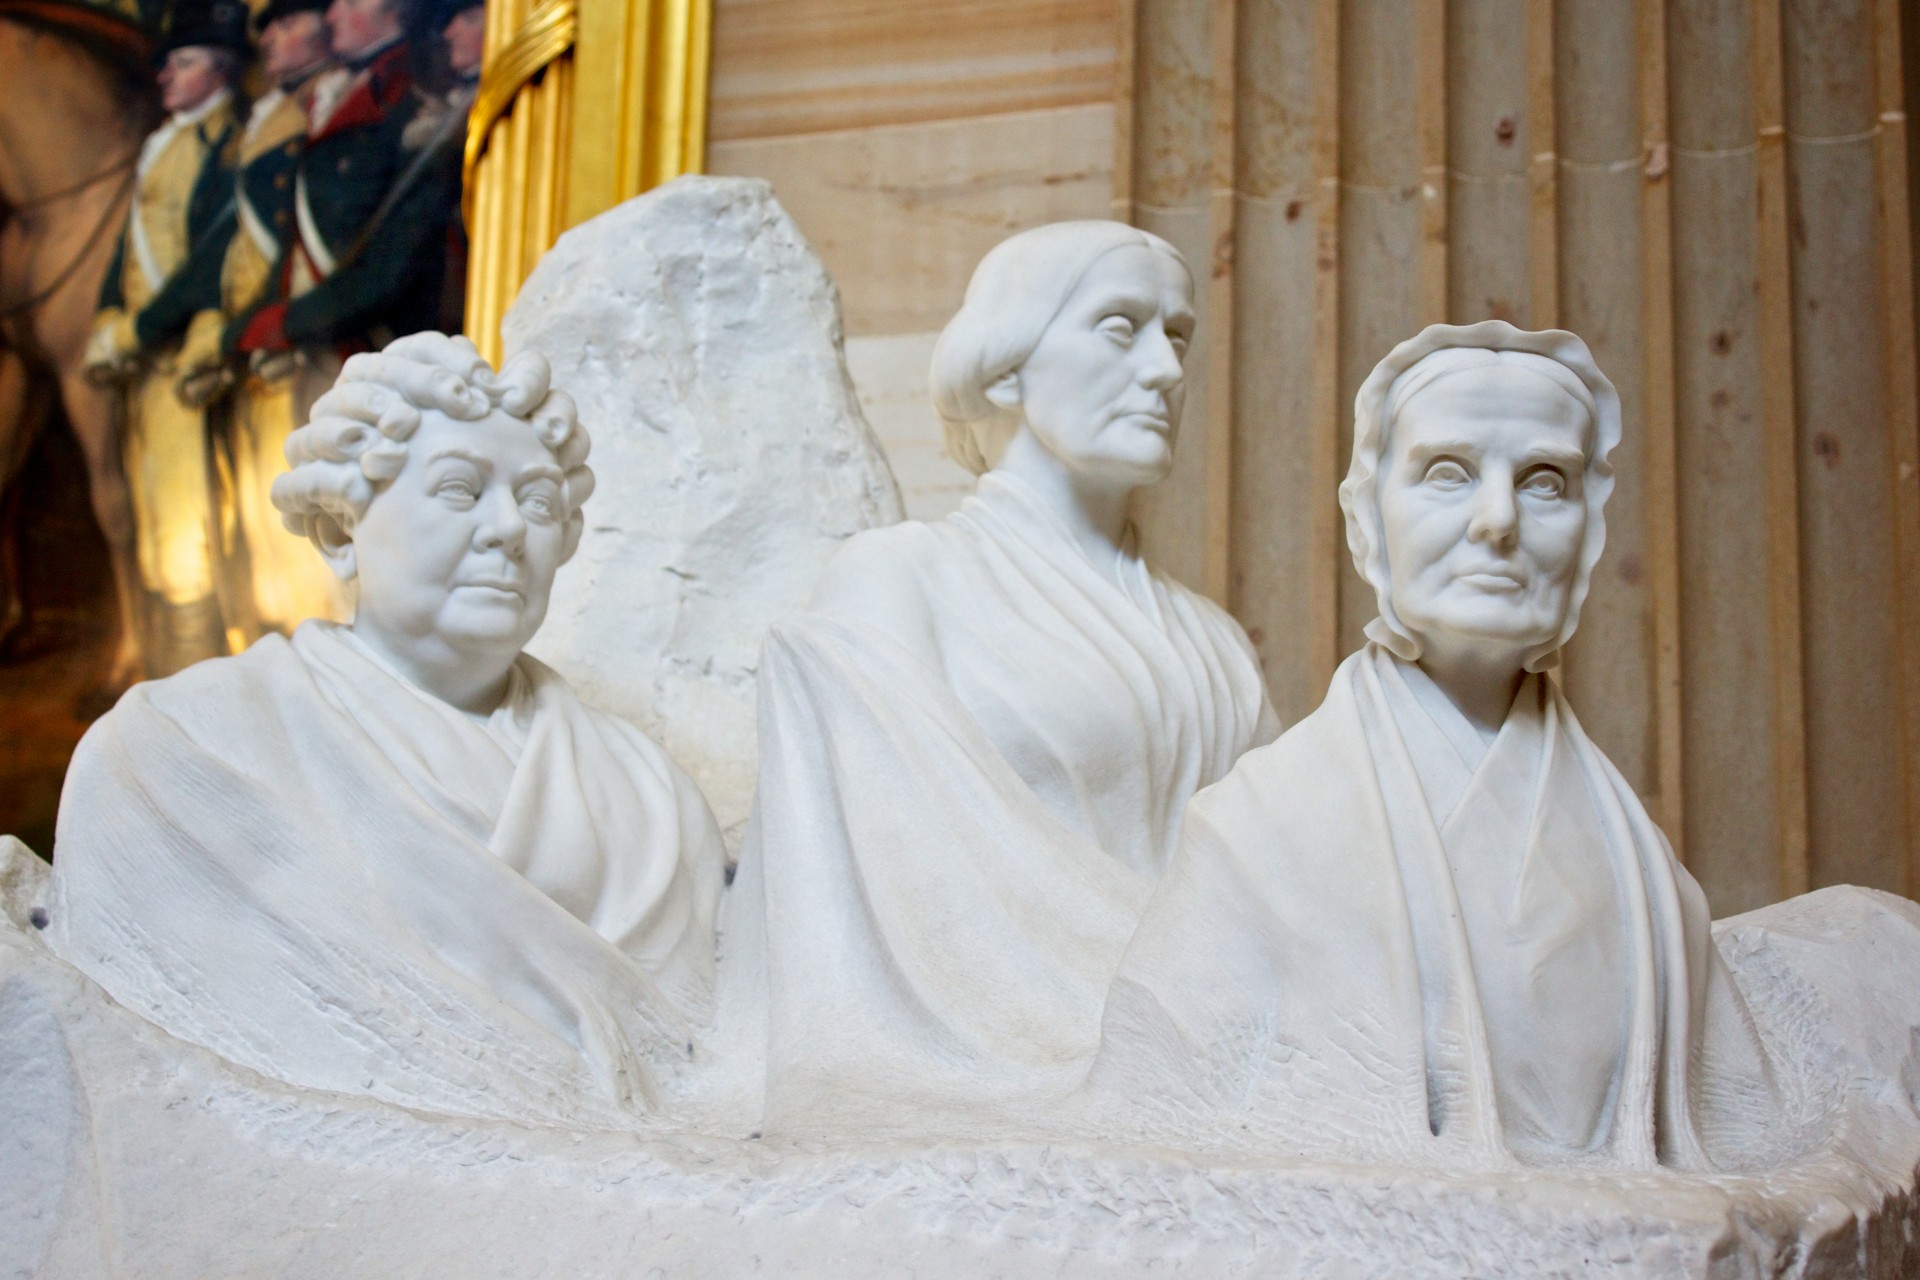 Suffrage and right to vote leaders portrayed in this statue are Lucretia Mott, Elizabeth Cady Stanton, and Susan B. Anthony.